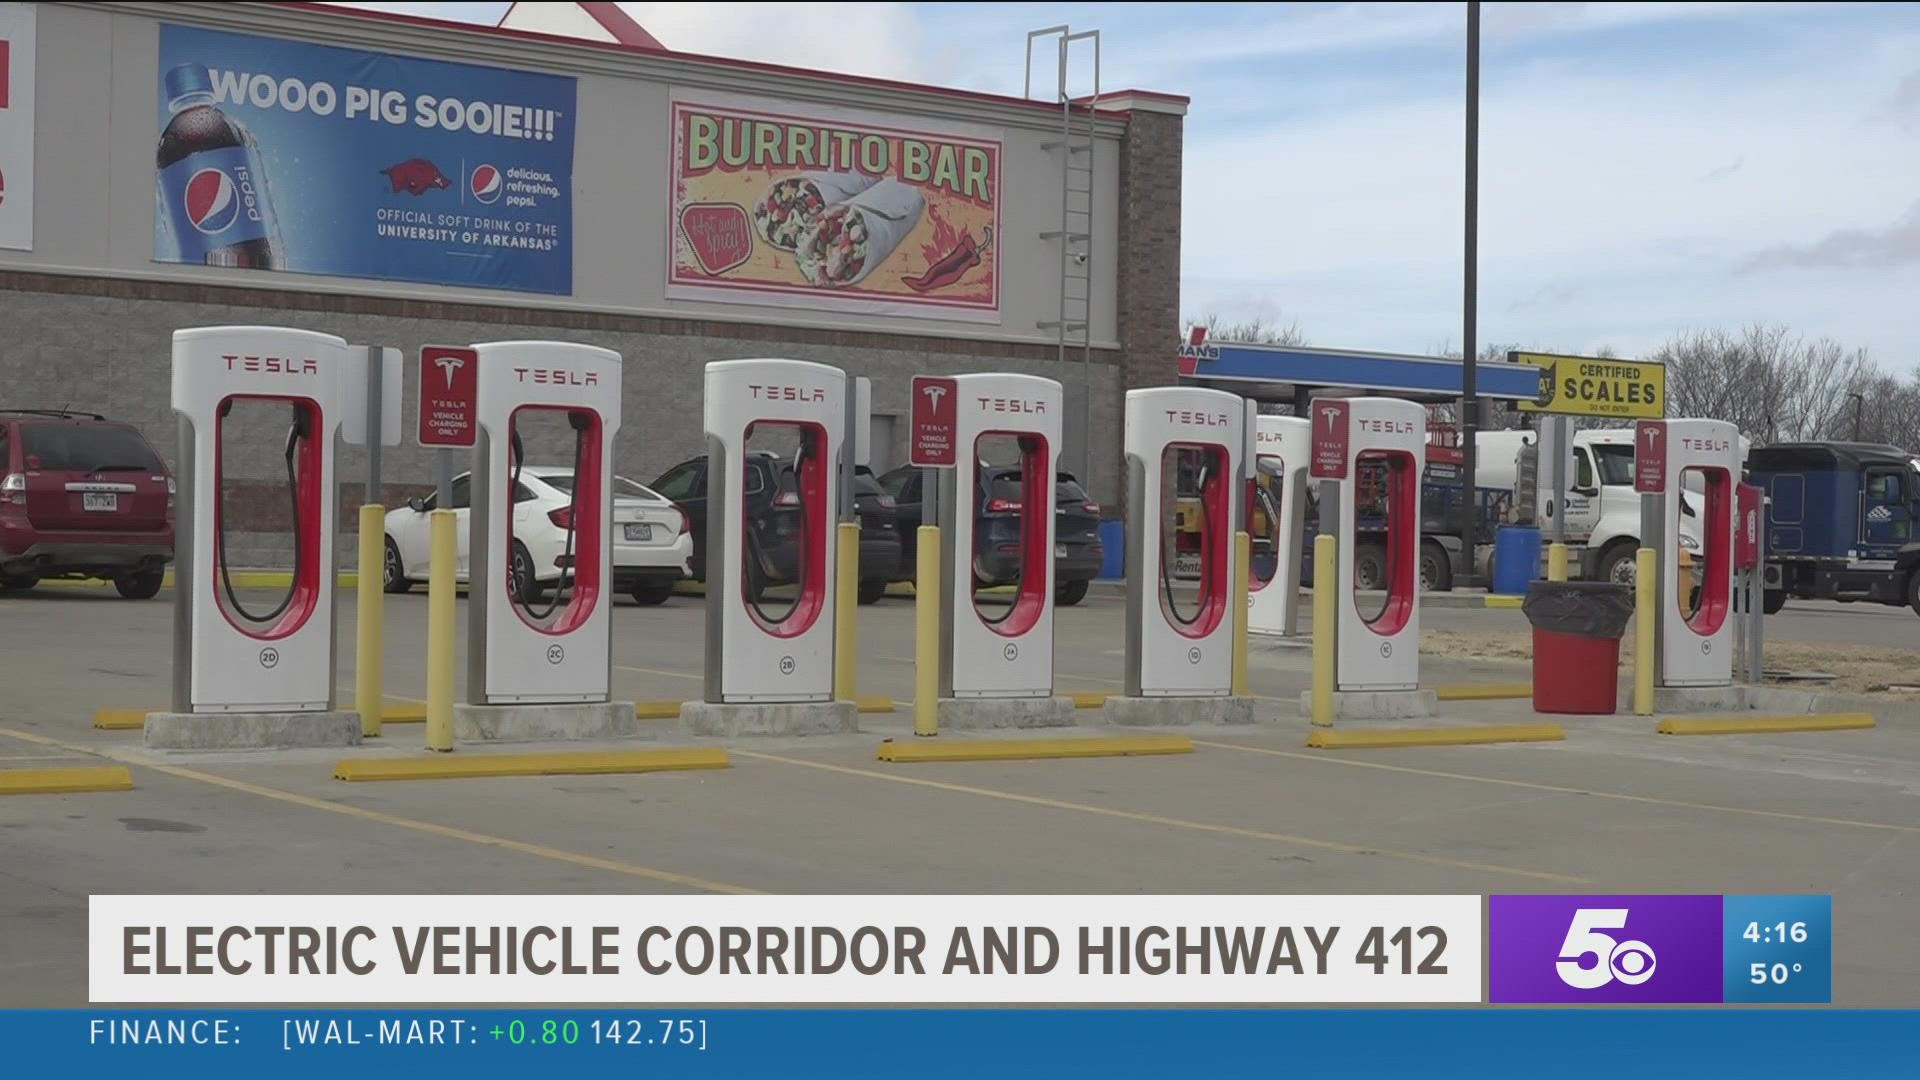 U.S. Highway 412 from the Oklahoma Arkansas state line to I-49 in Springdale will be nominated as an alternative fuel corridor for electric vehicles.